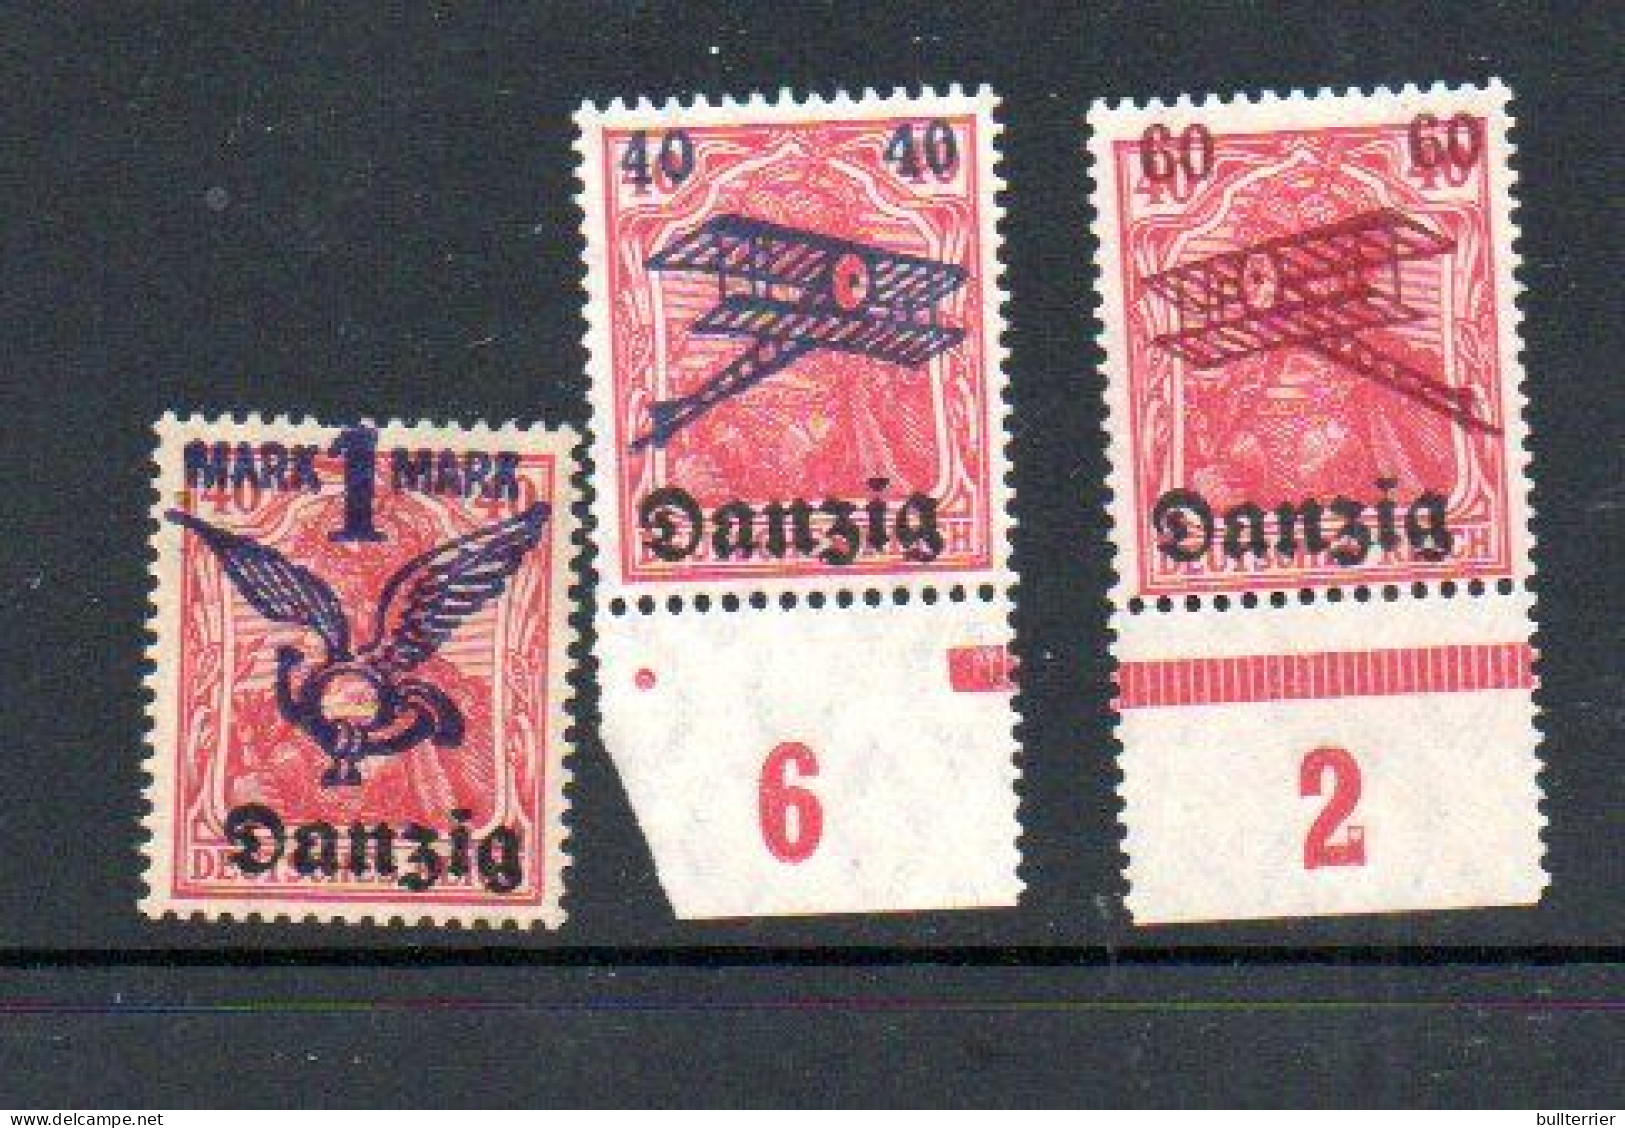 DANZIG - 1920 AIR SURCHARGES SET OF 3 MINT HINGED PREVIOUSLY - Autres - Europe